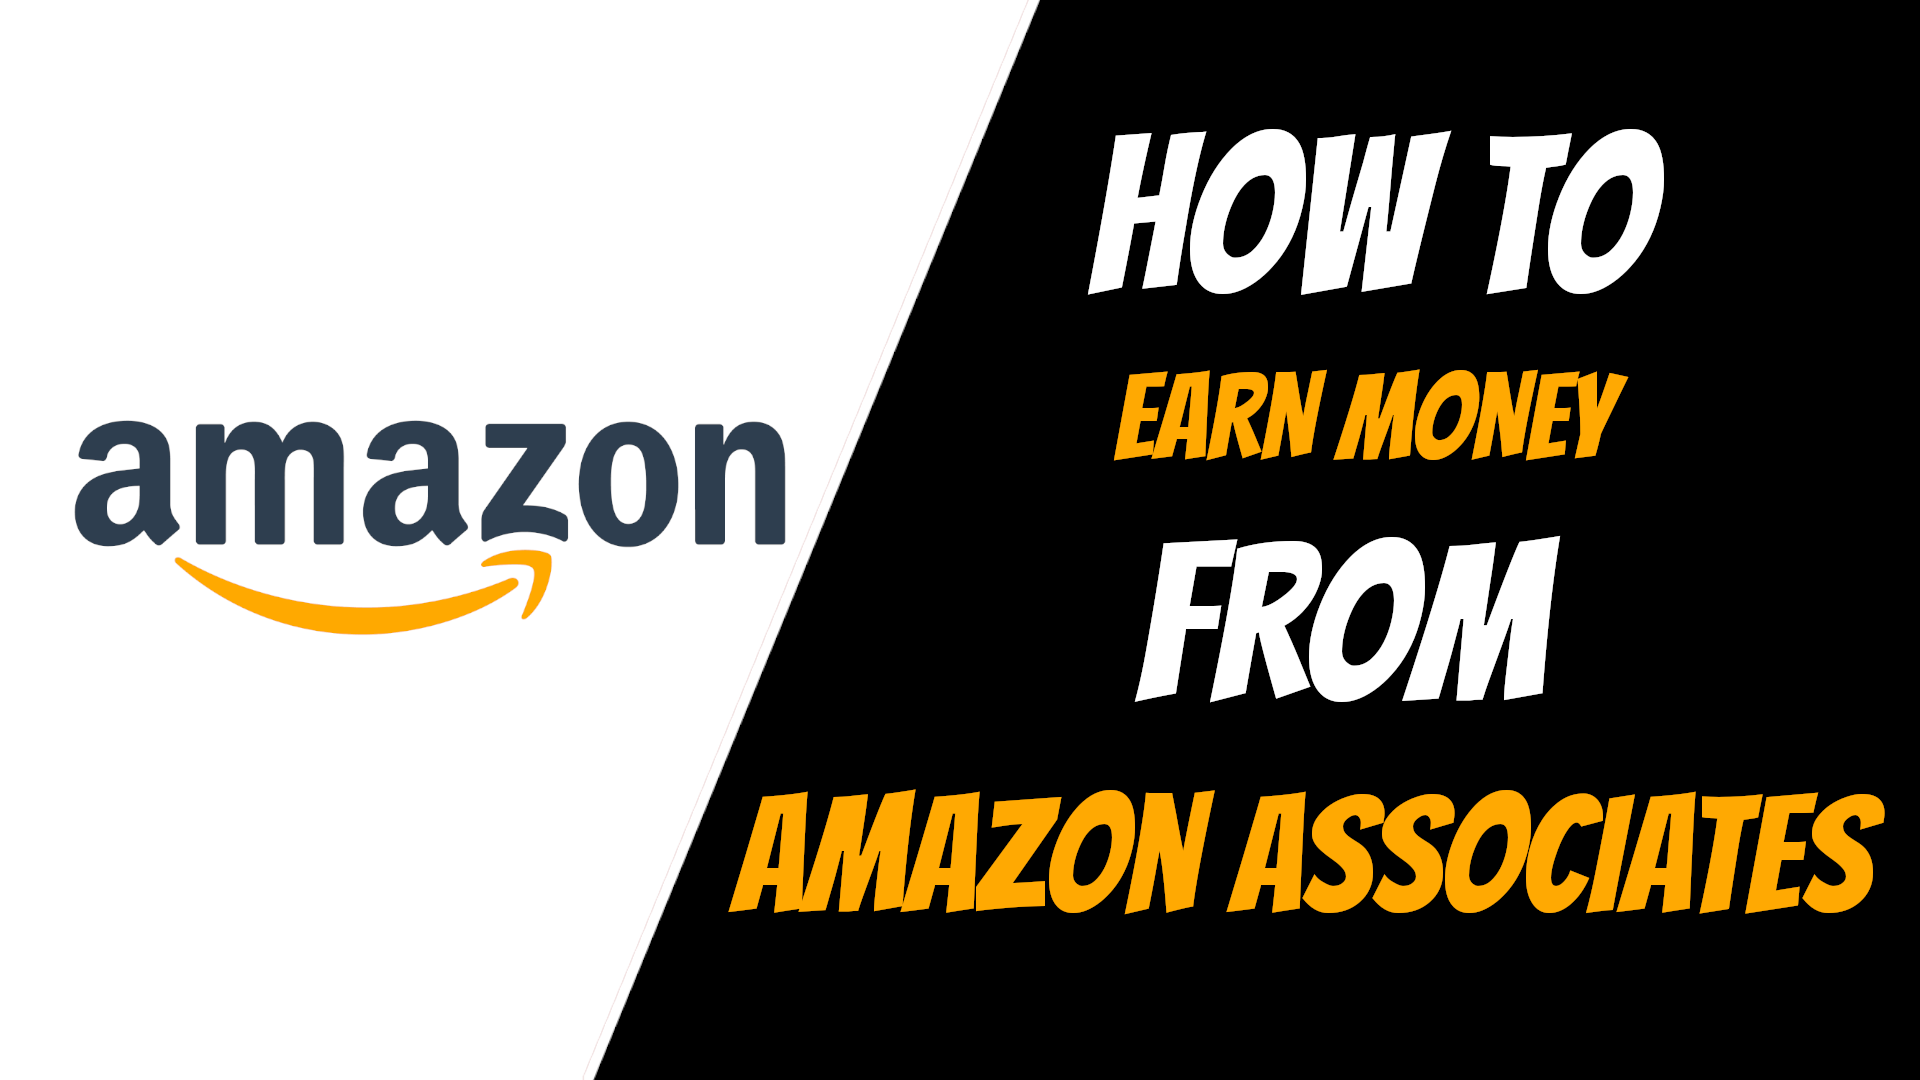 Using solo ads to make money from Amazon Associates